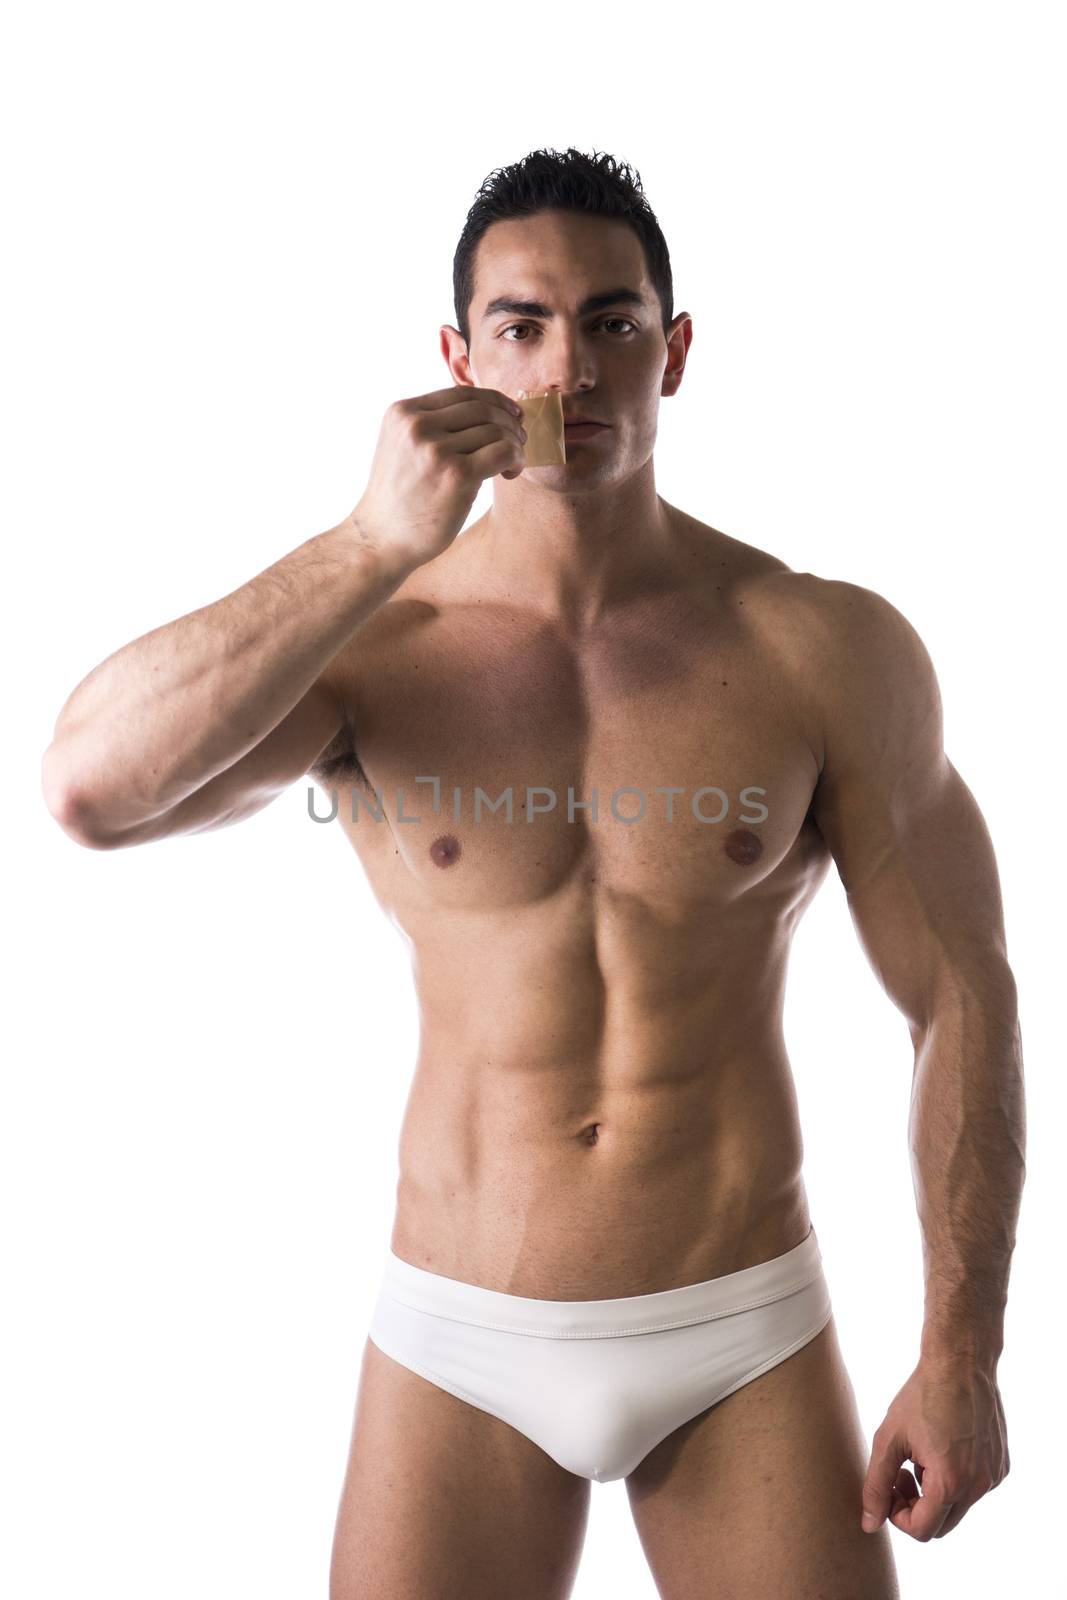 Muscular man in his underwear removing tape from his mouth on white background